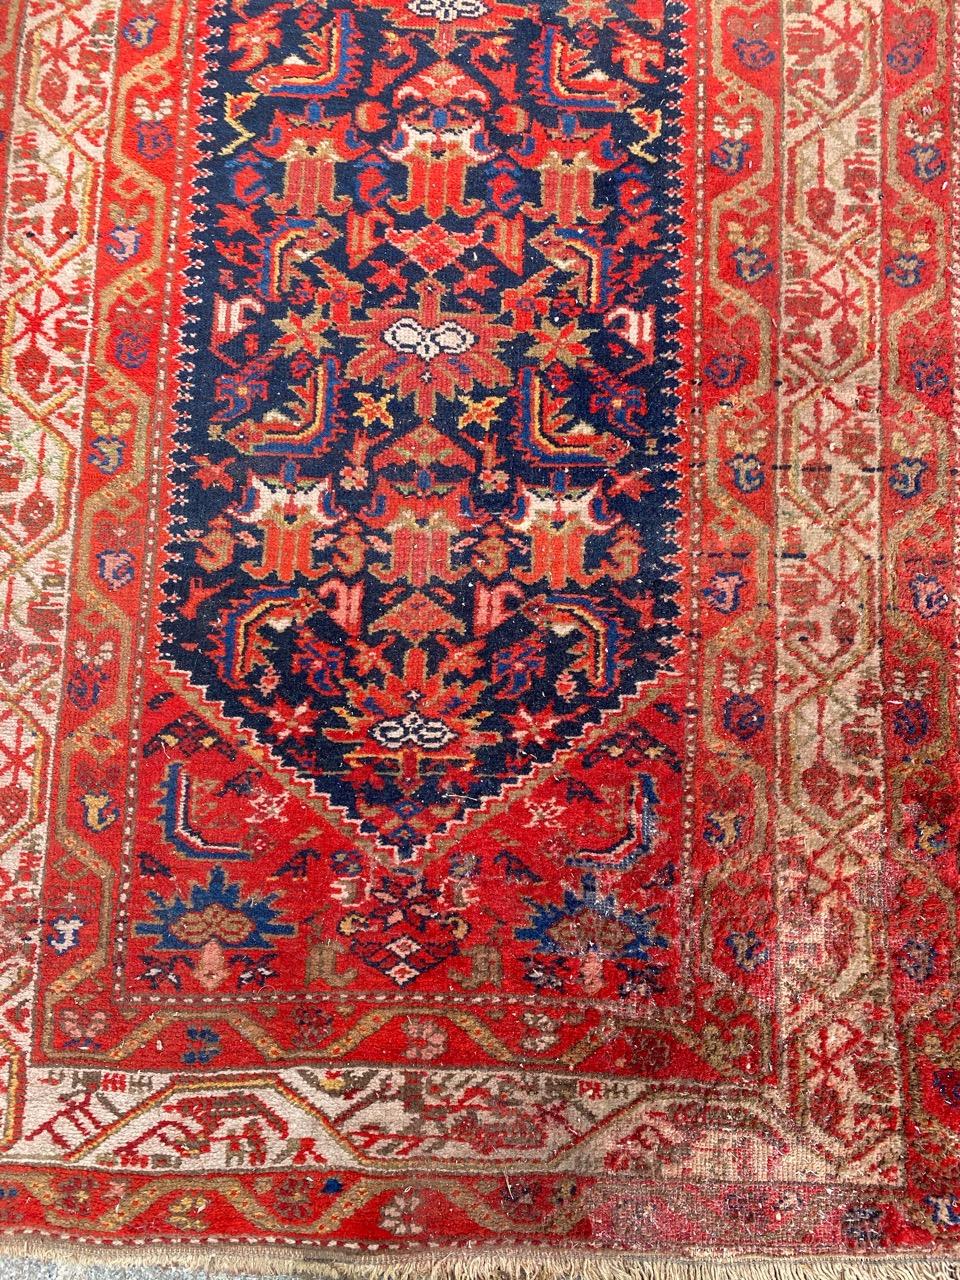 Beautiful late 19th century Malayer runner with beautiful design and nice natural colors, entirely hand knotted with wool velvet on cotton foundation.

✨✨✨
